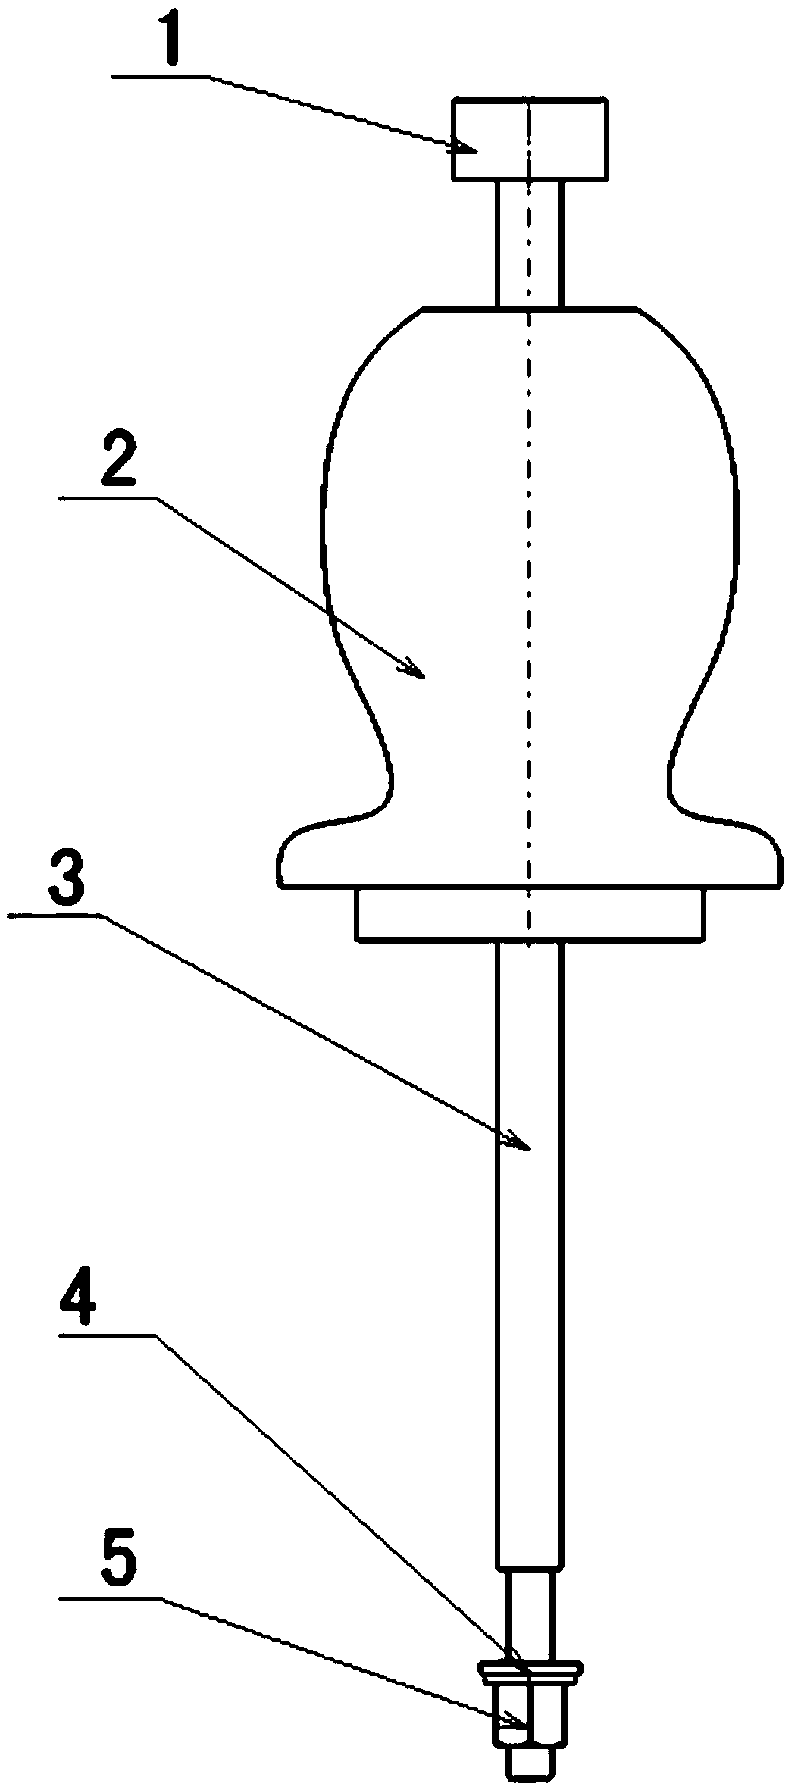 A tool for removing shouldered bushing of drilling jig and its use method